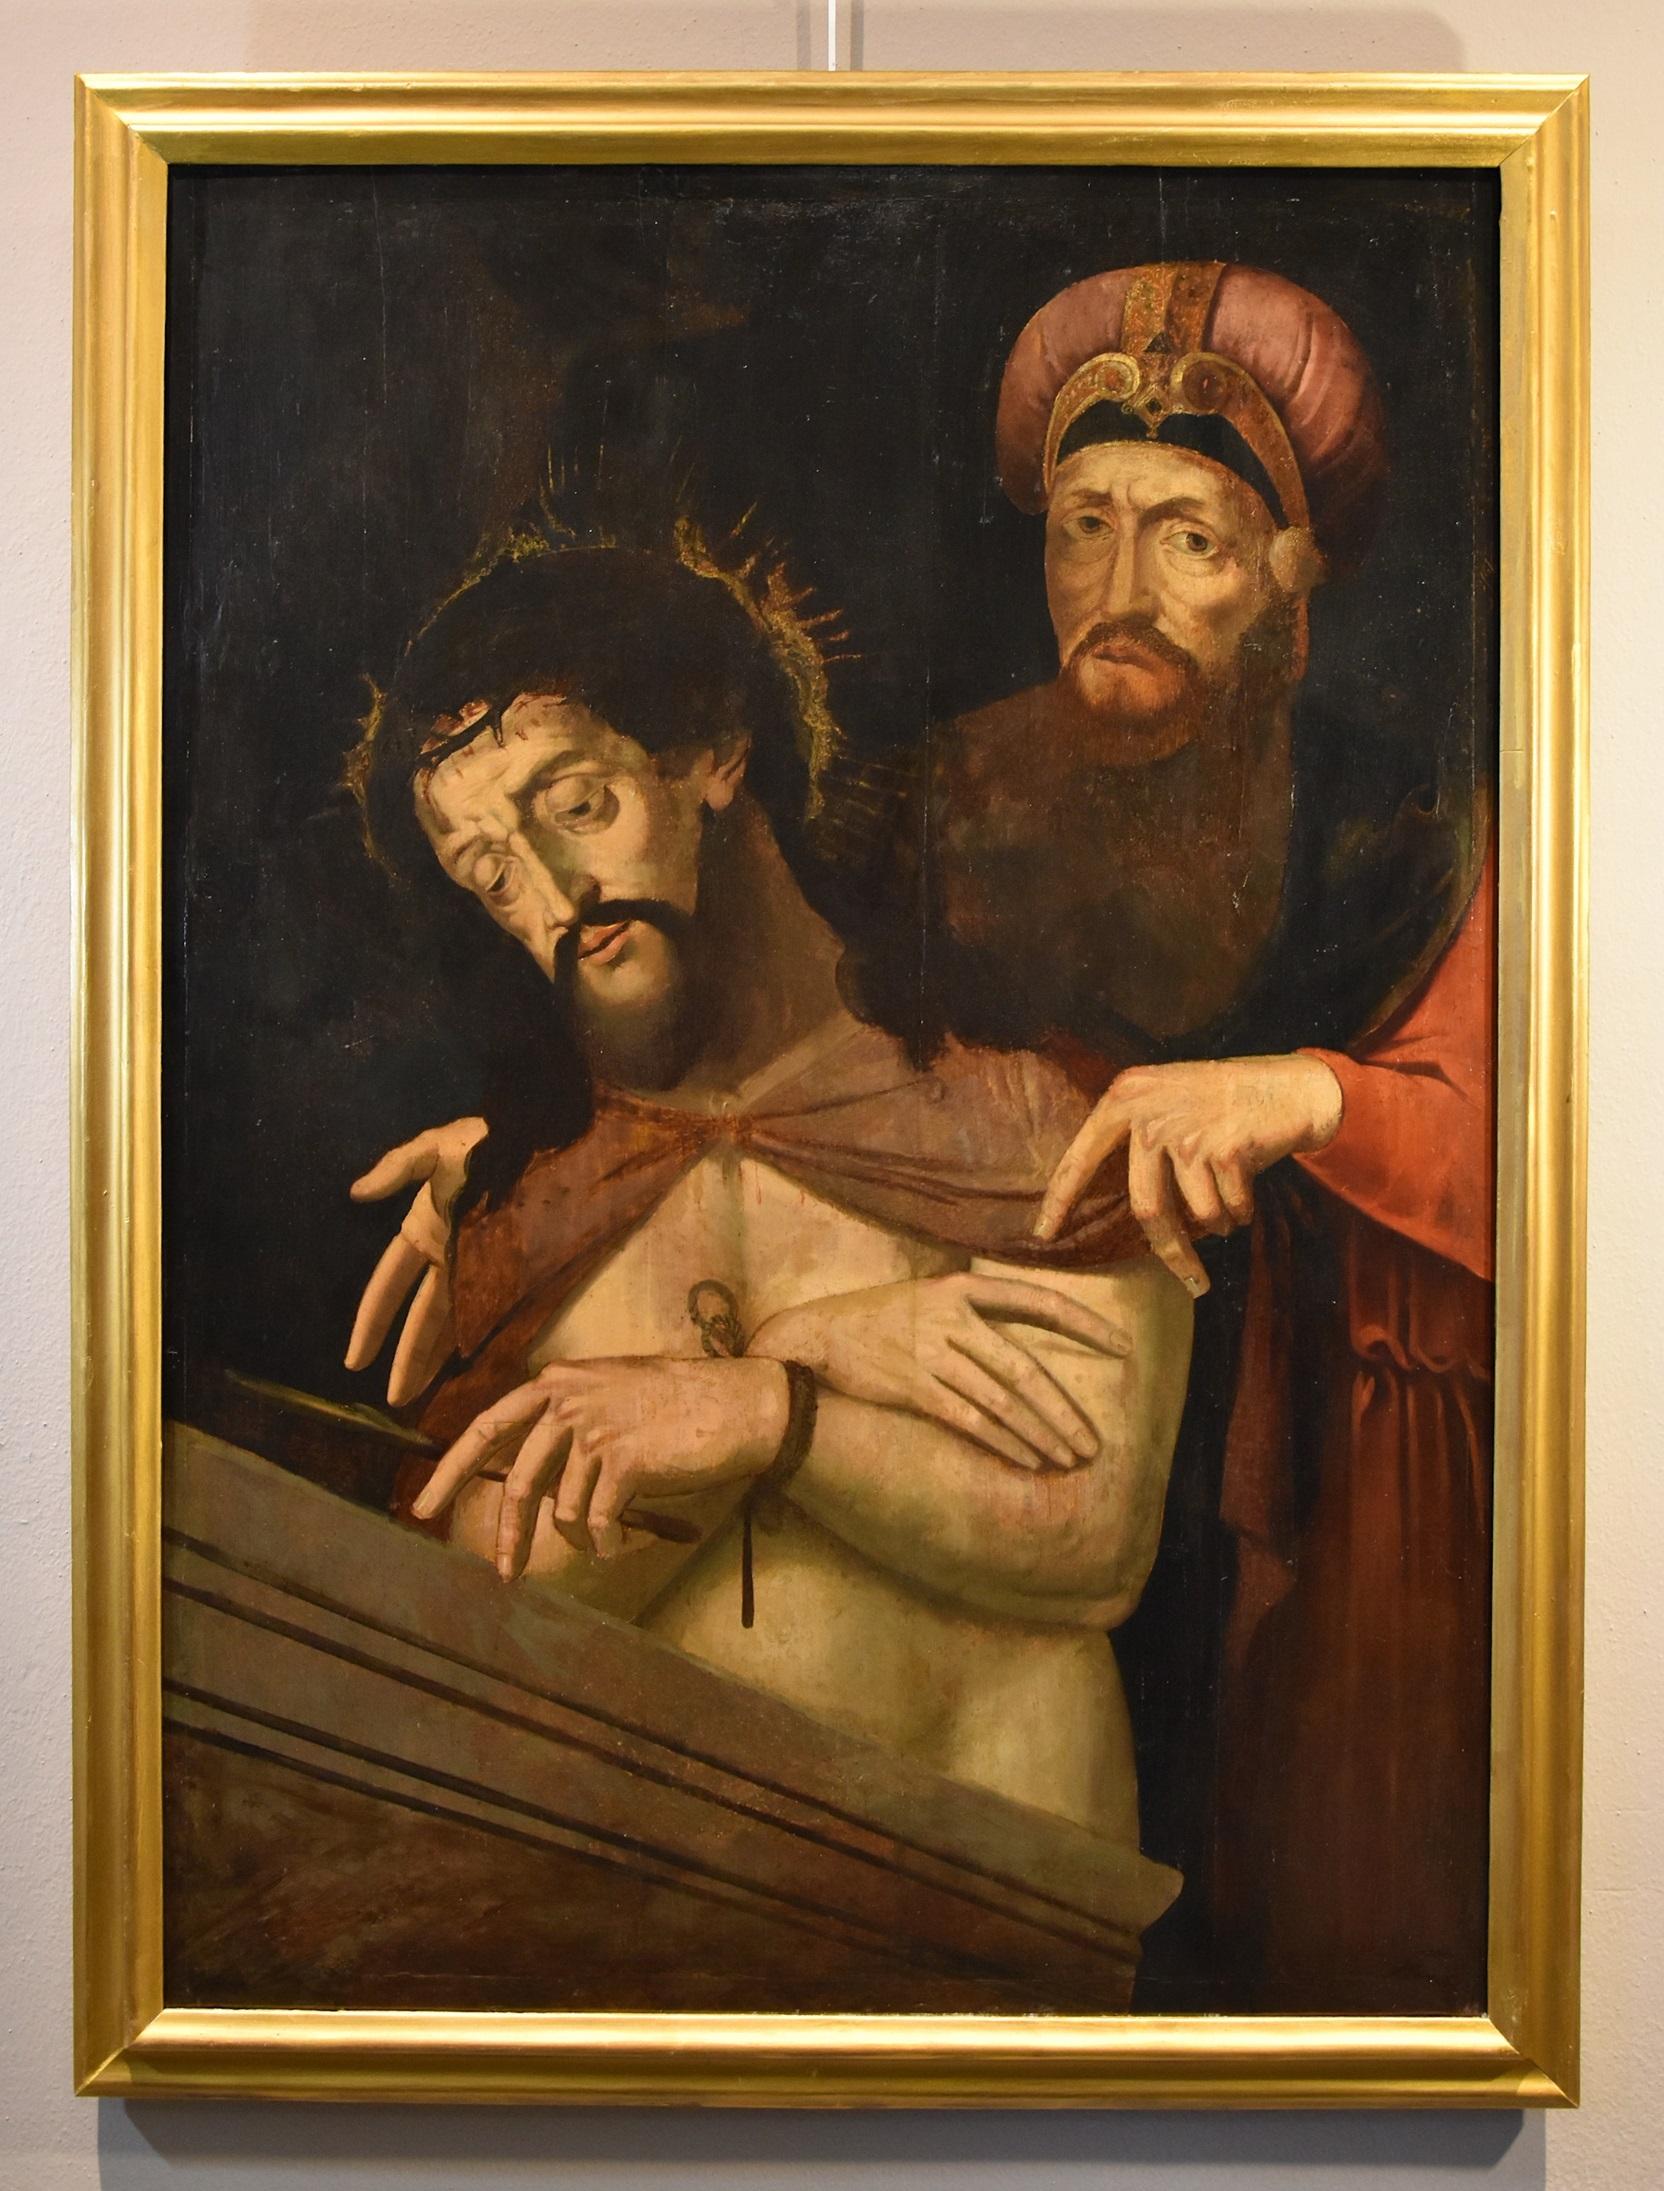 Ecce Homo Coxie Paint 16/17th Century Paint Oil on table Old master Flemish Art - Painting by Michael Coxie (malines, 1499 - 1592)